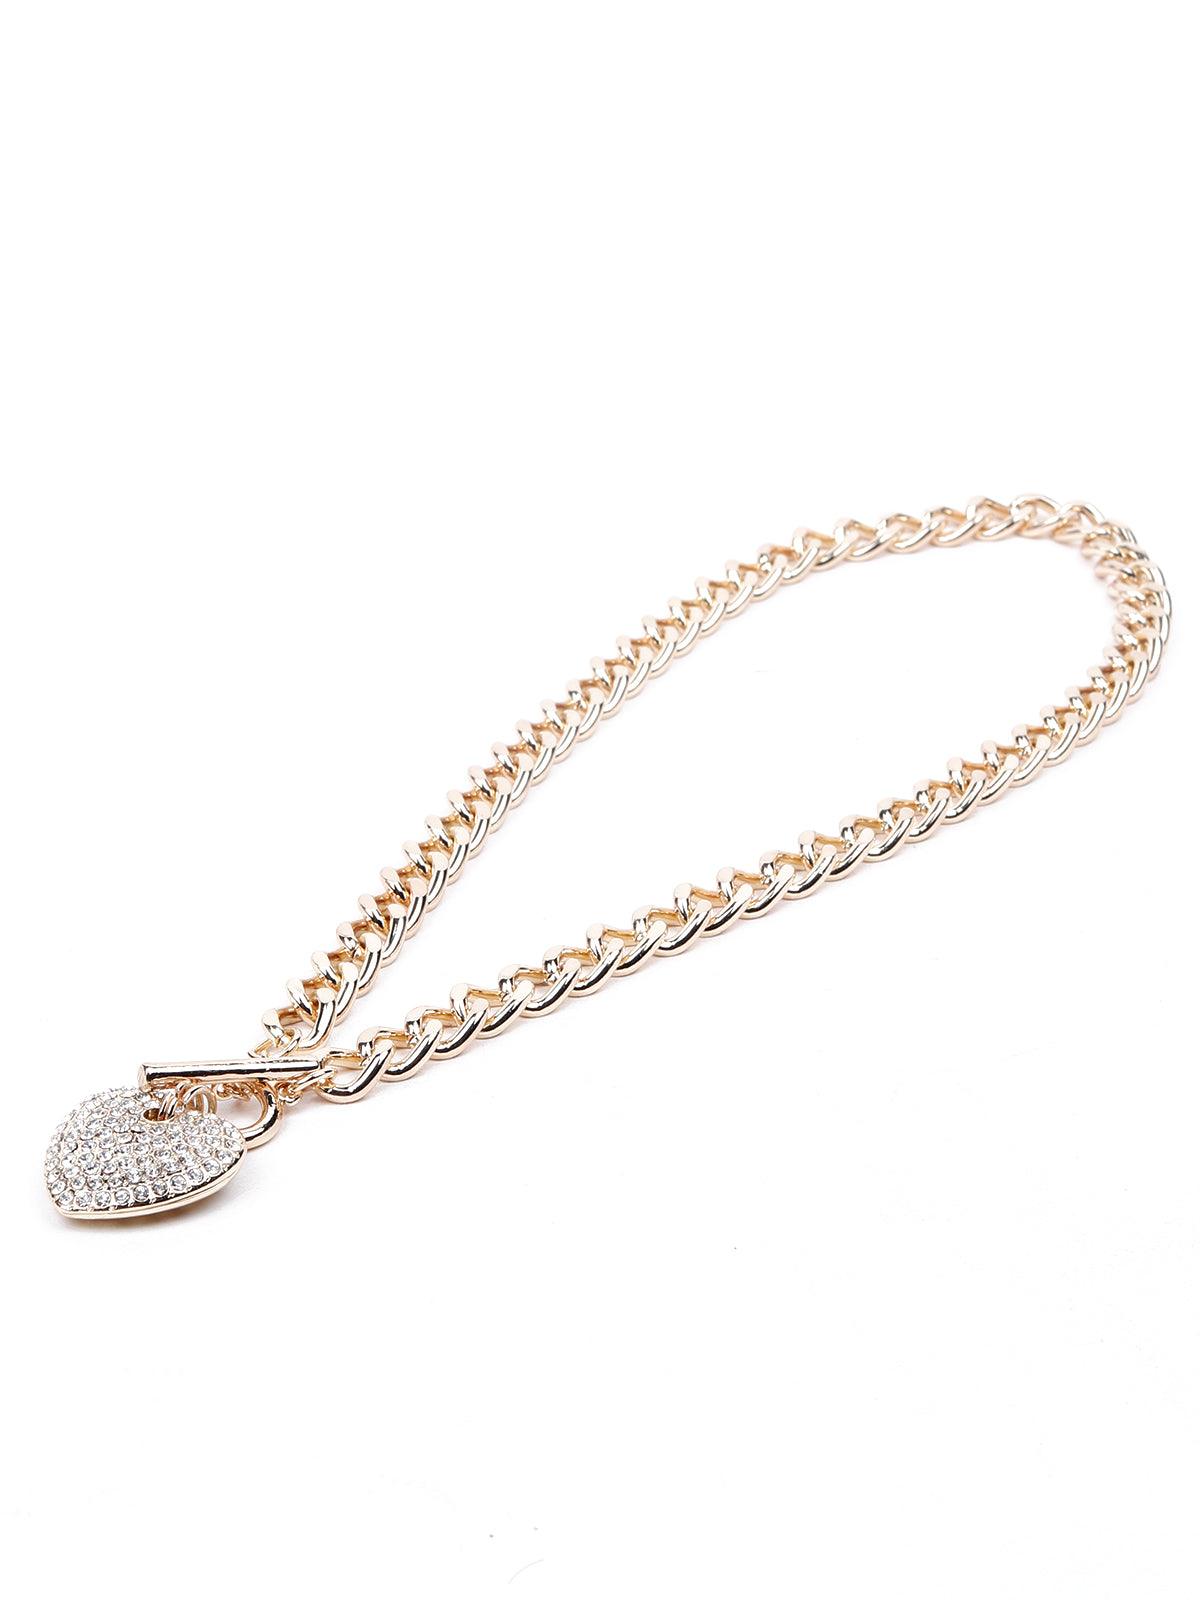 Thick gold-tone chain with a heart-shaped locket - Odette